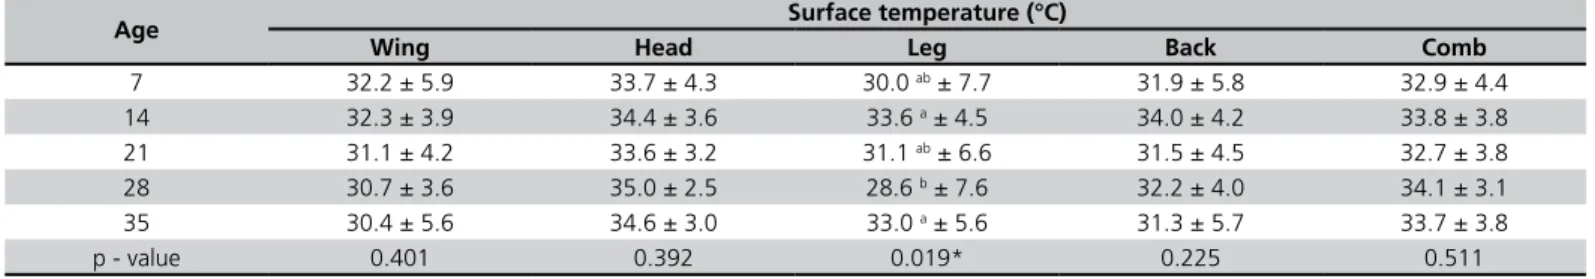 Table 3 - Variation of body parts surface temperature as a function of bird age.